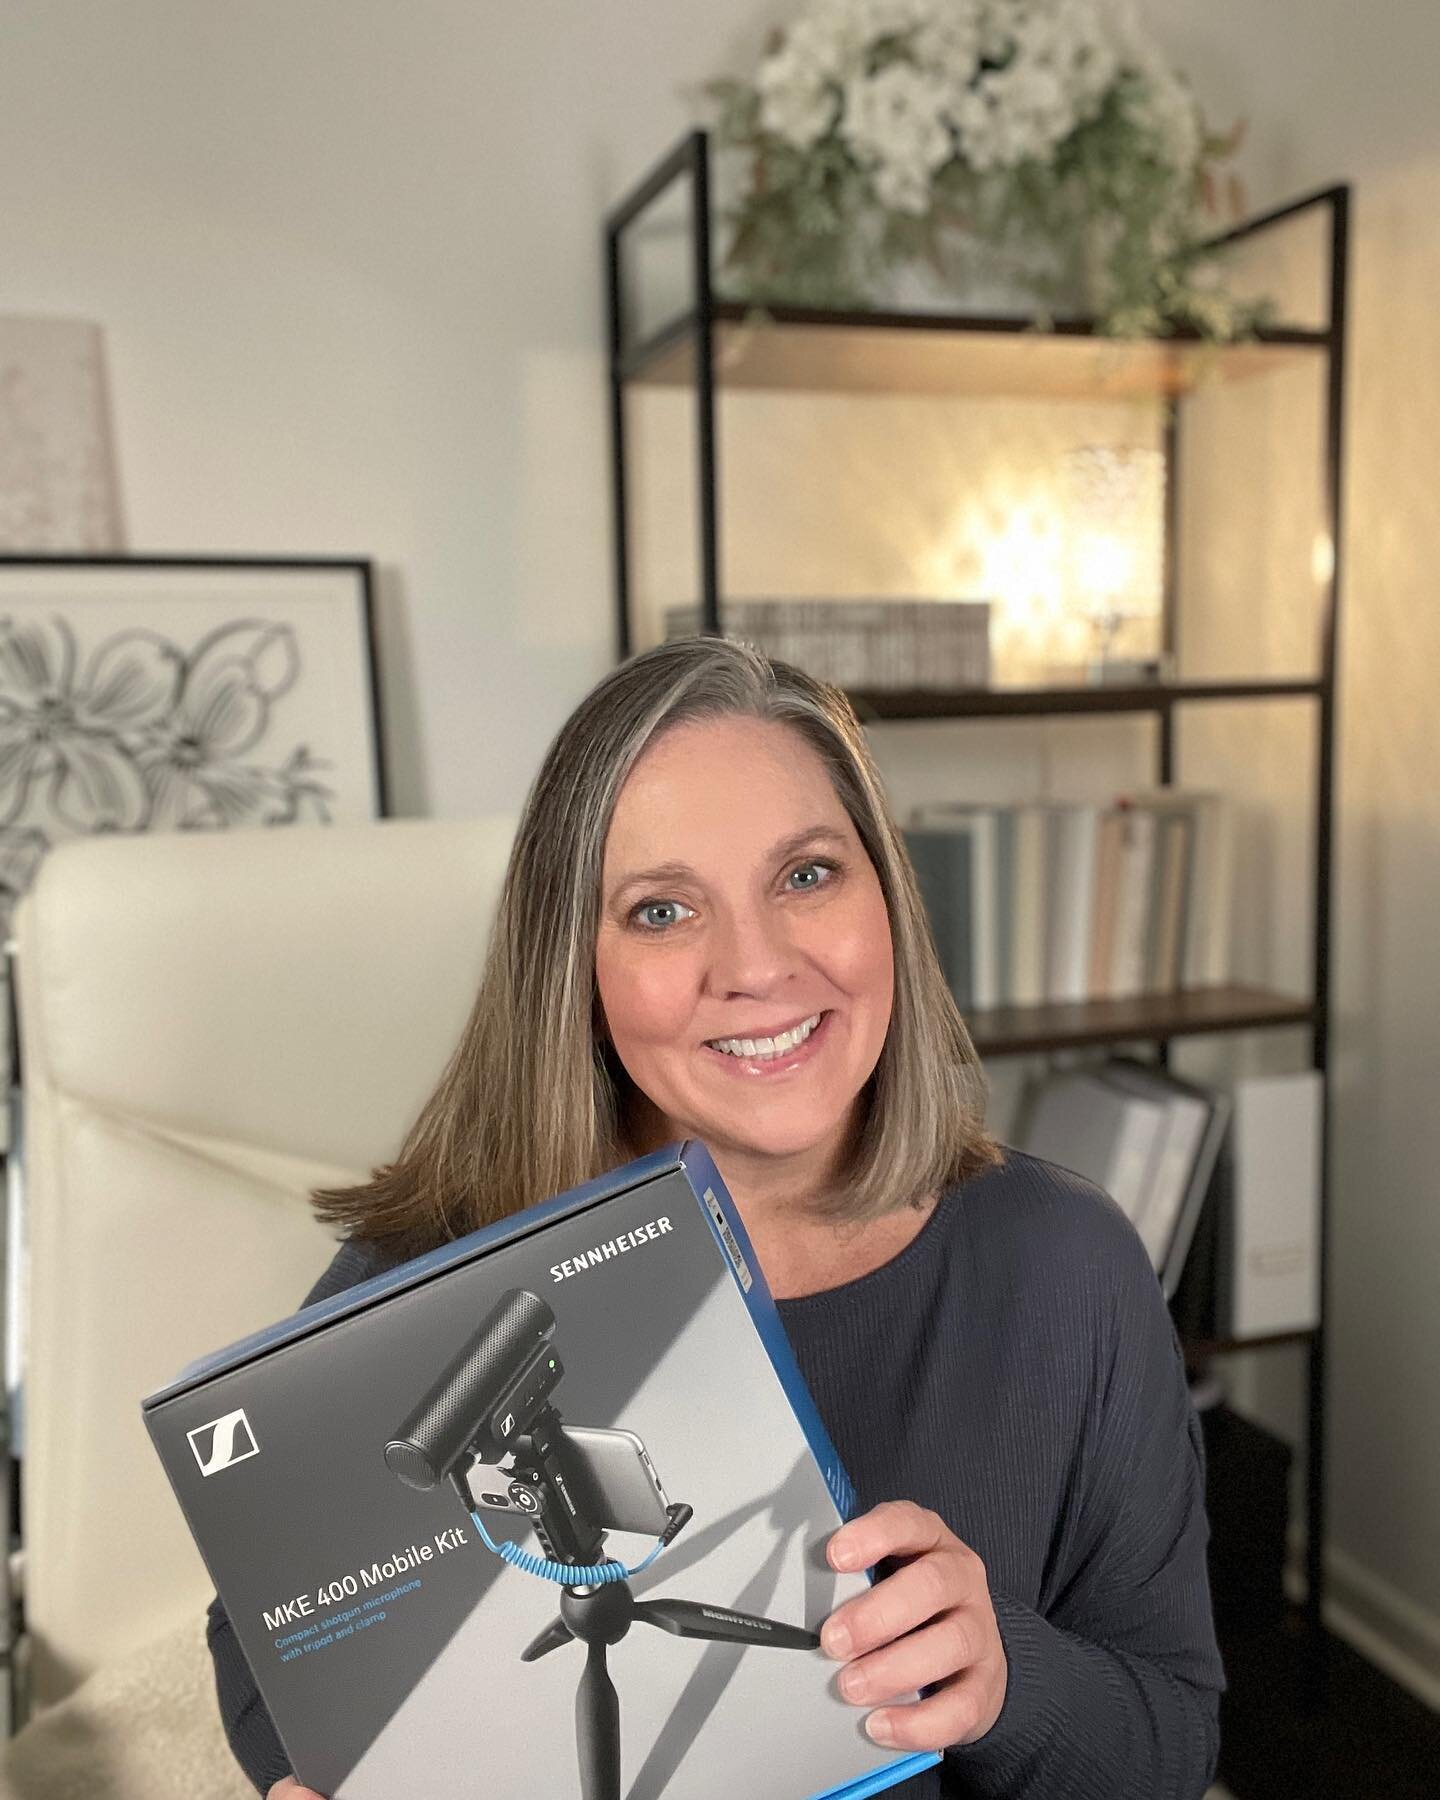 So excited to try out this new Sennheiser microphone! Thank you to @officialthinkmedia for the fantastic YouTube class! I can&rsquo;t wait to work with this new gear!